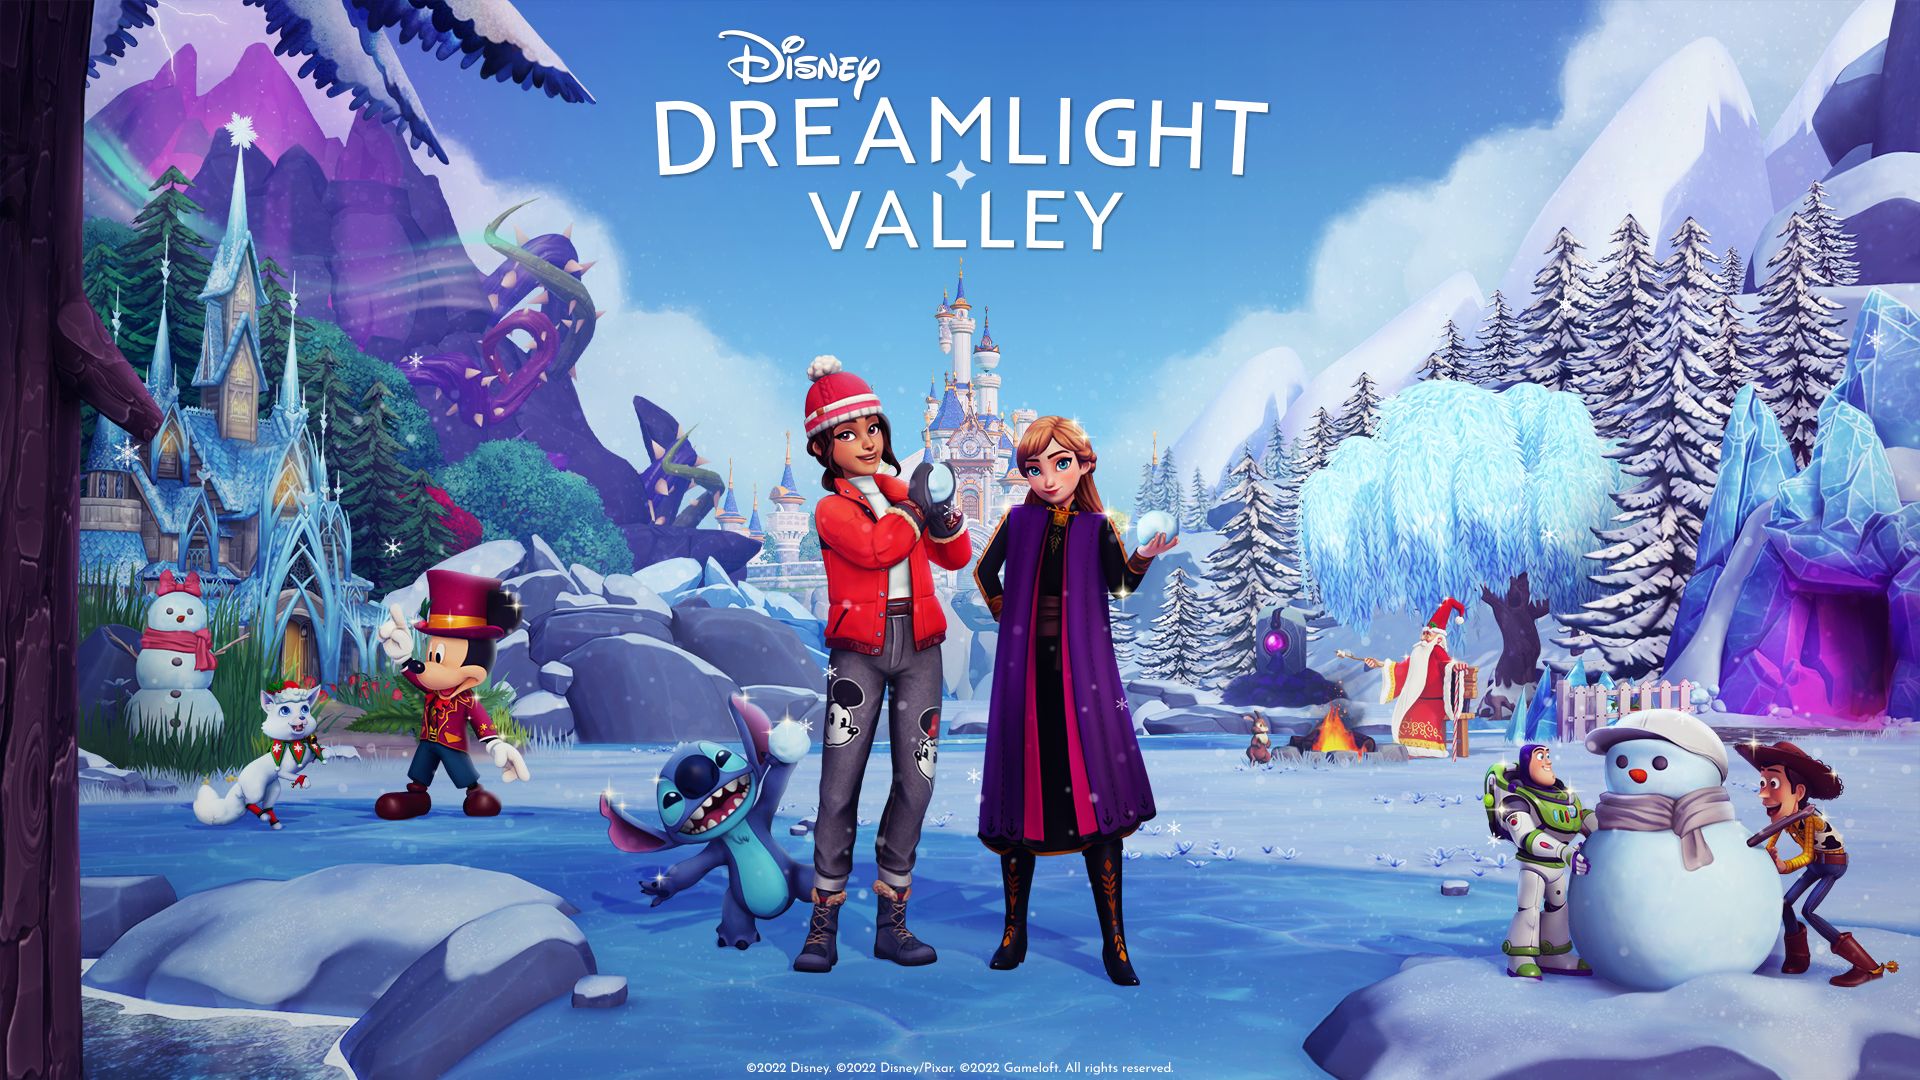 disney-dreamlight-valley-goes-from-the-toy-box-to-the-stars-in-latest-content-update-missions